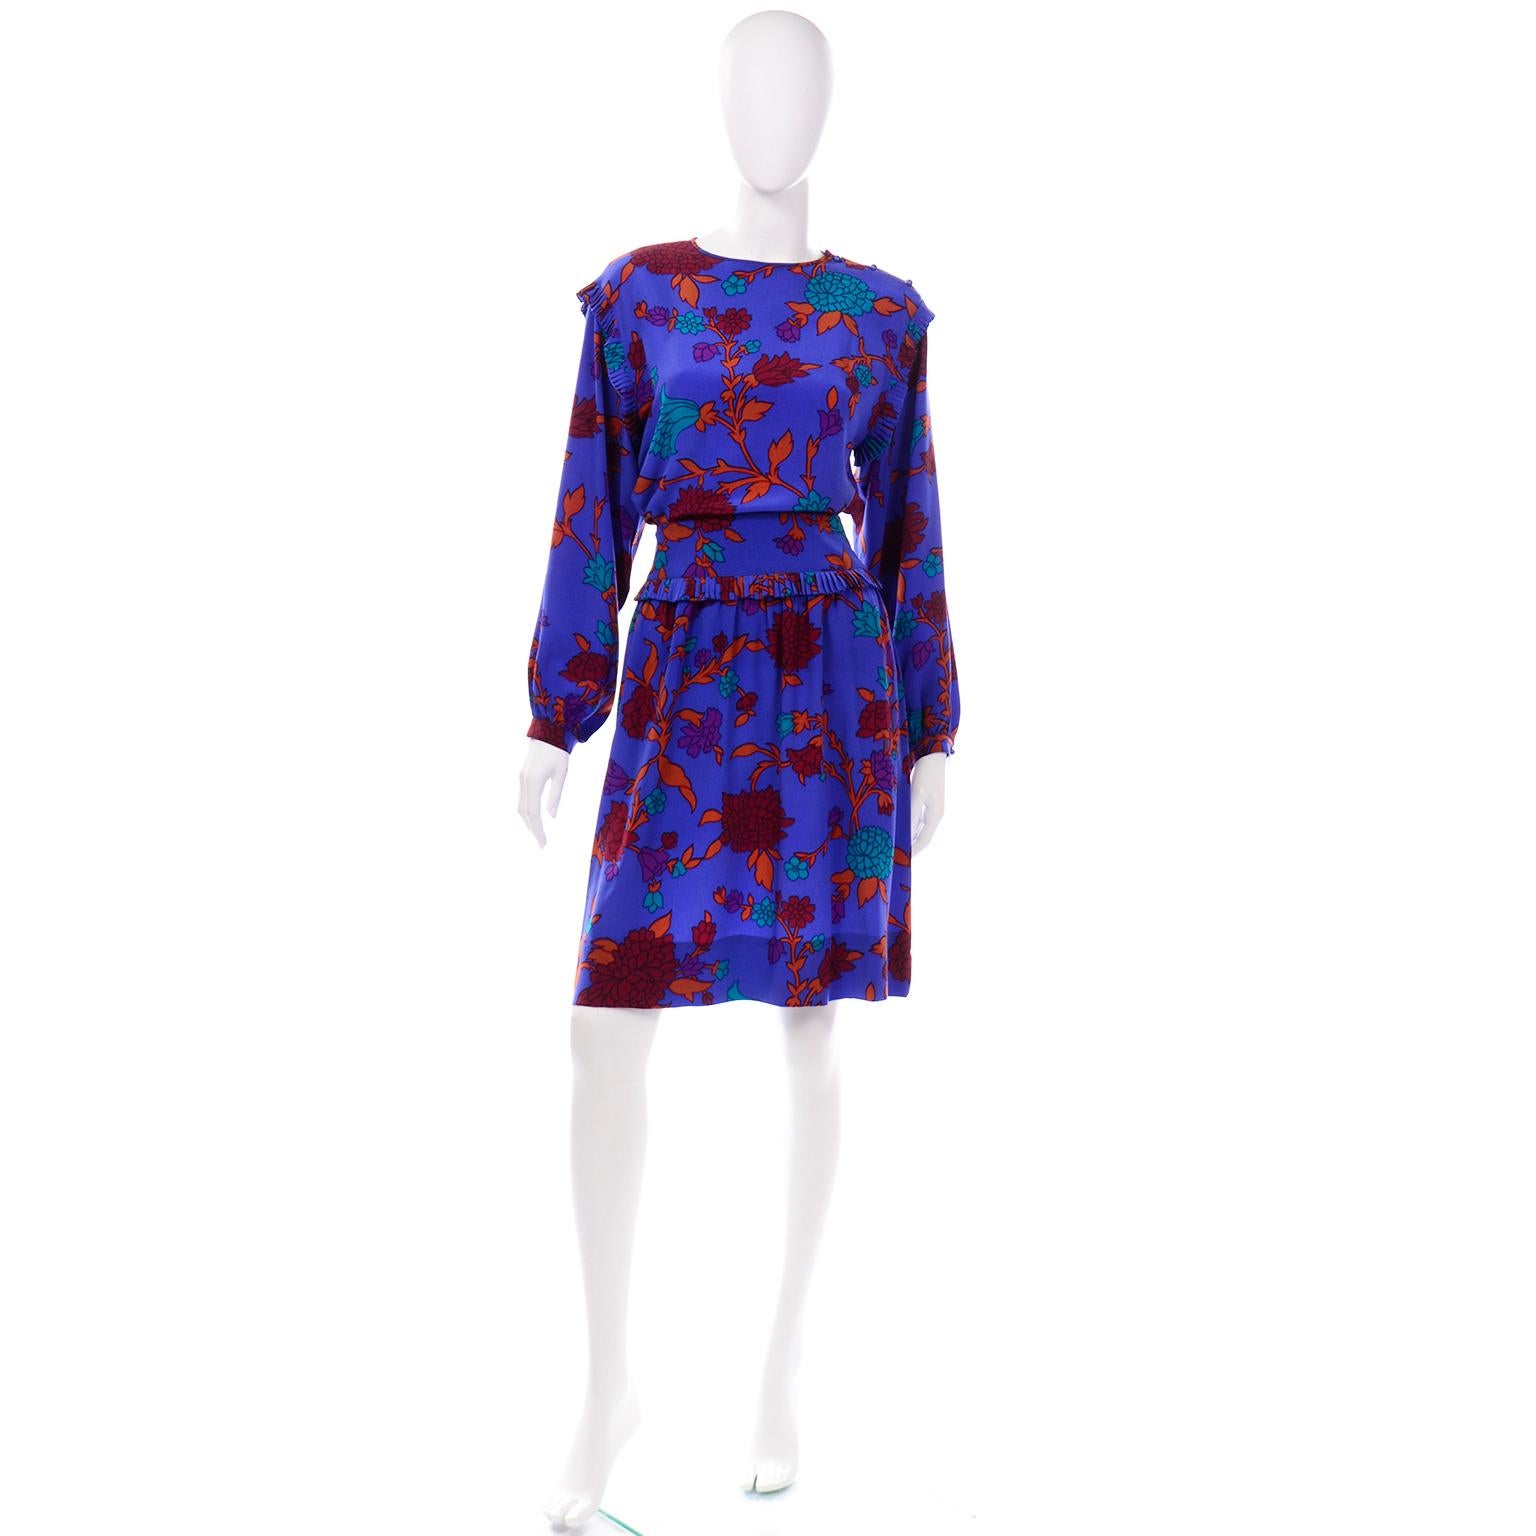 This is a really lovely 2 piece vintage dress from Albert Nipon in a bright blue silk floral print. We love vintage Albert Nipon pieces and especially love his fabrics and prints.  It was actually Pearl Nipon, Albert's wife, who designed the